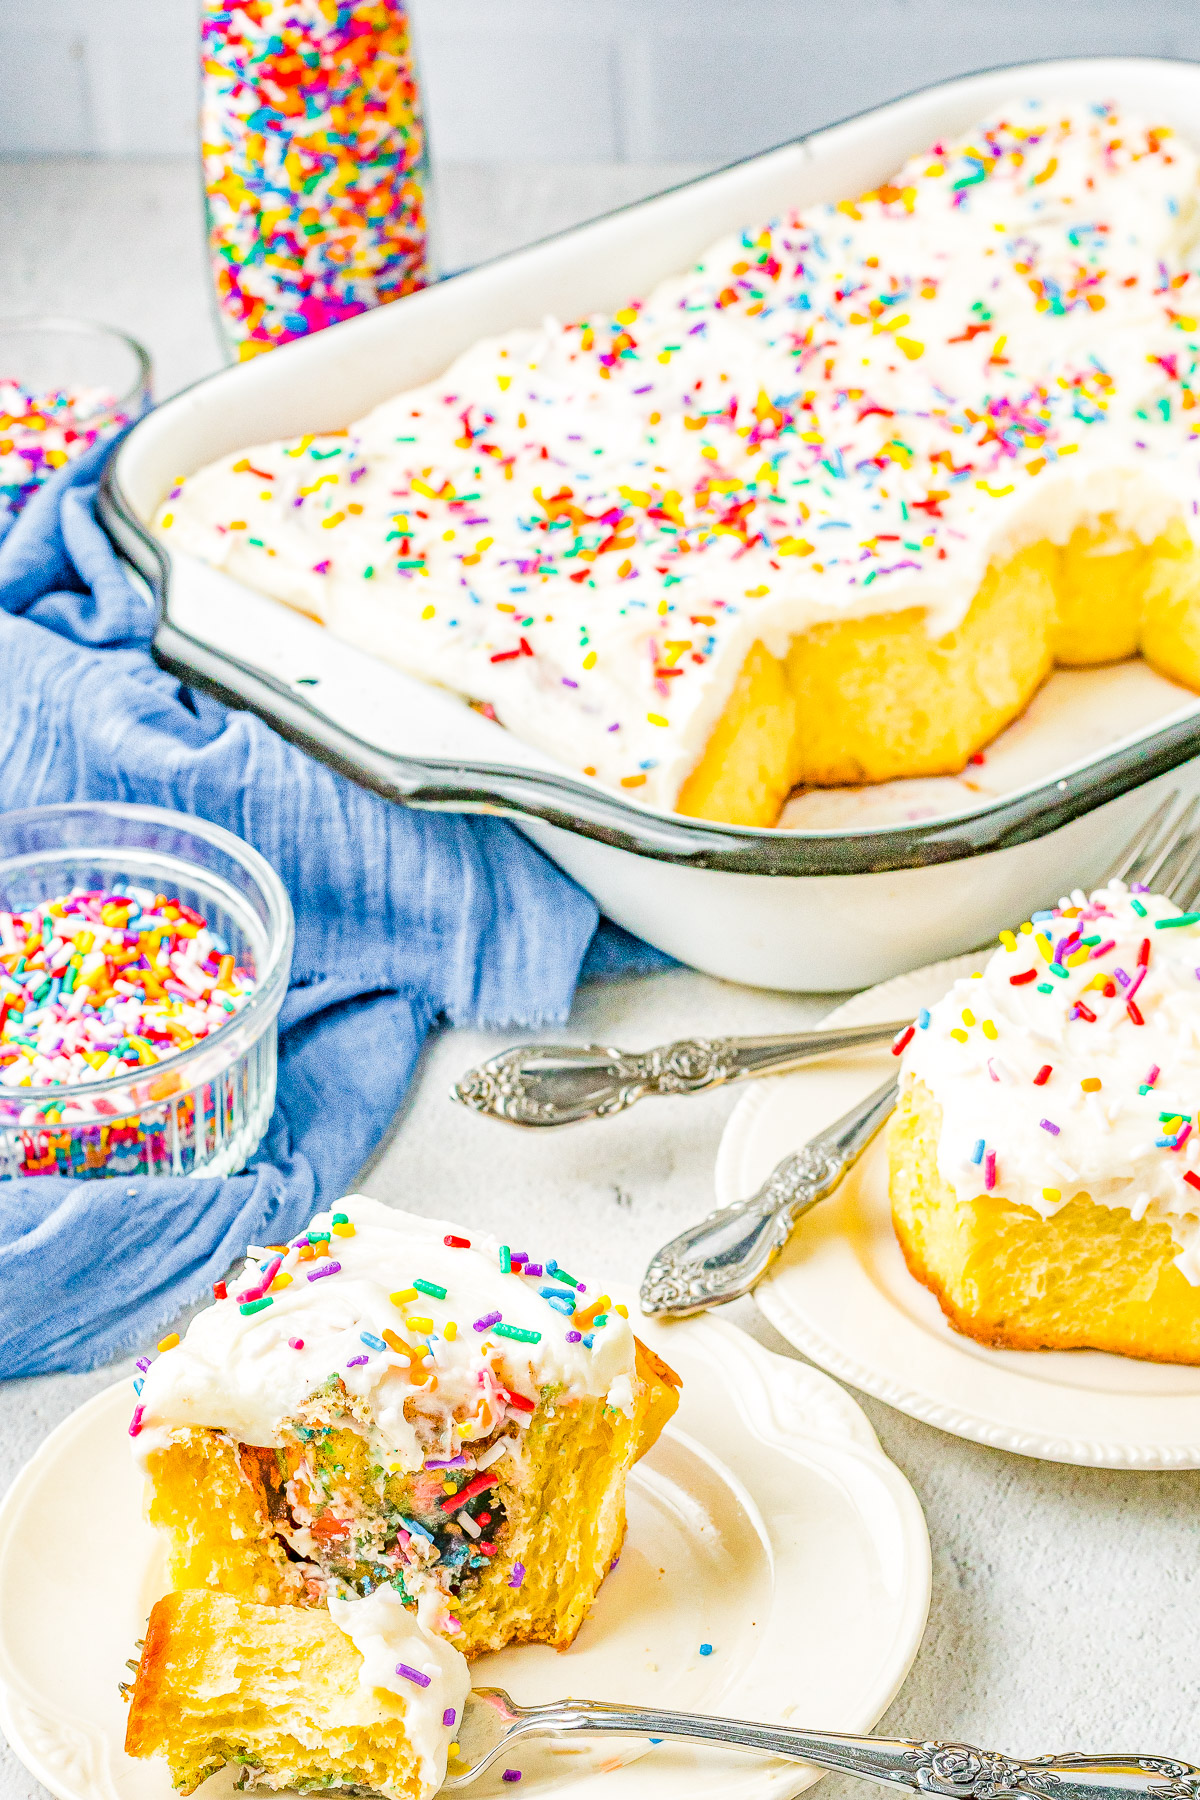 Birthday Cake Cinnamon Rolls - The softest, fluffiest, most tender cinnamon rolls stuffed with cinnamon-and-sugar and rainbow sprinkles! Topped with tangy cream cheese frosting and more sprinkles! The recipe is EASY to follow even if you've never made cinnamon rolls and there's a MAKE AHEAD overnight option!